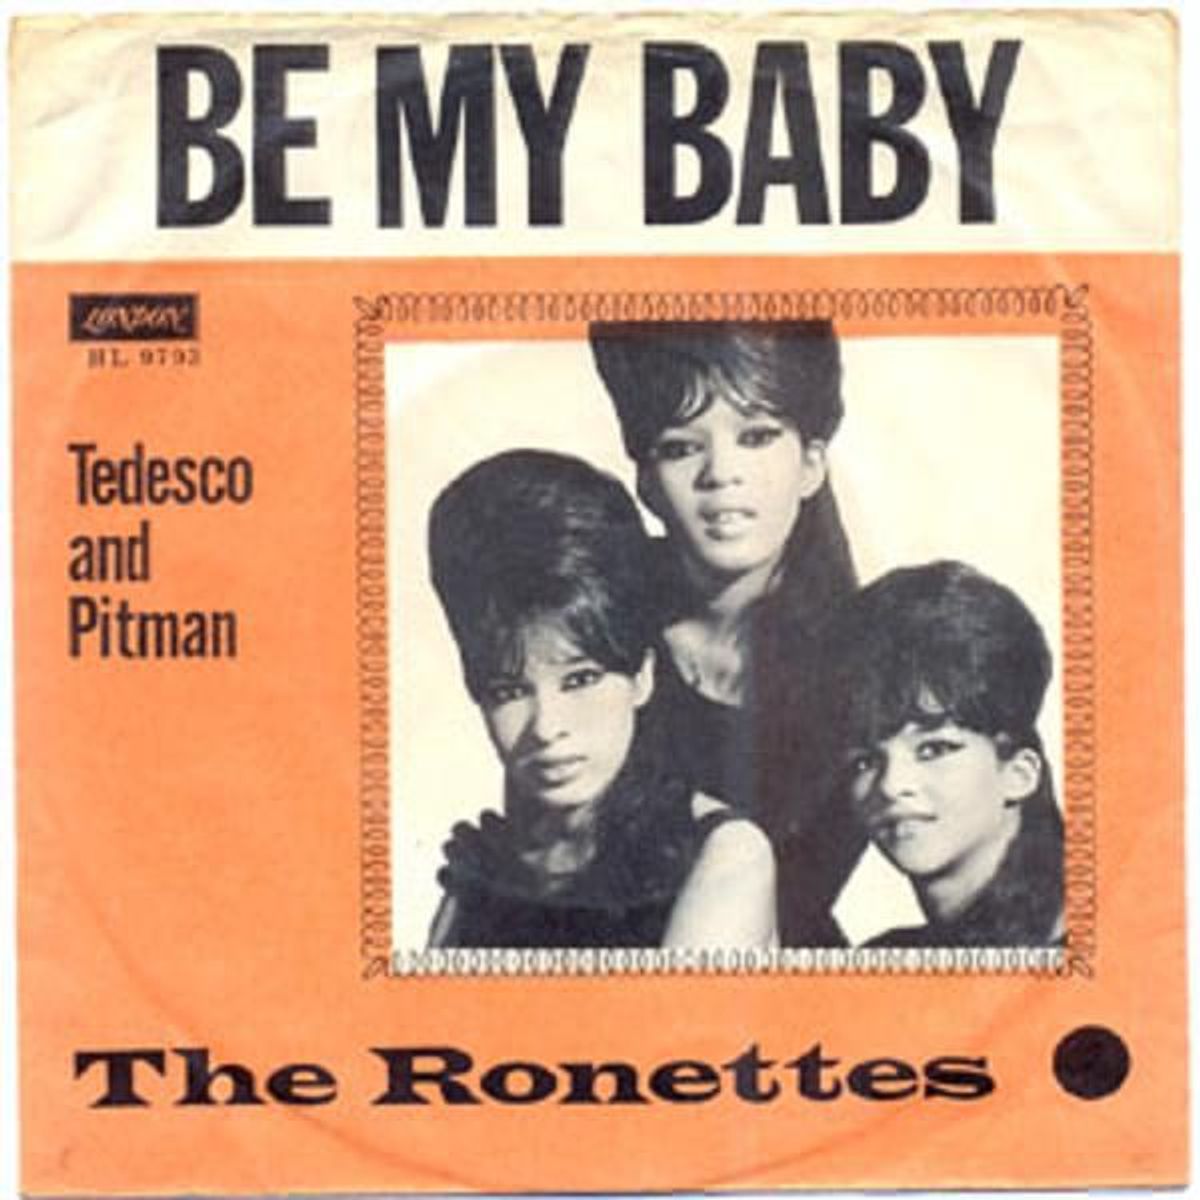 Musical Girl Groups Of The 1960s: The Ronettes' "Be My Baby"